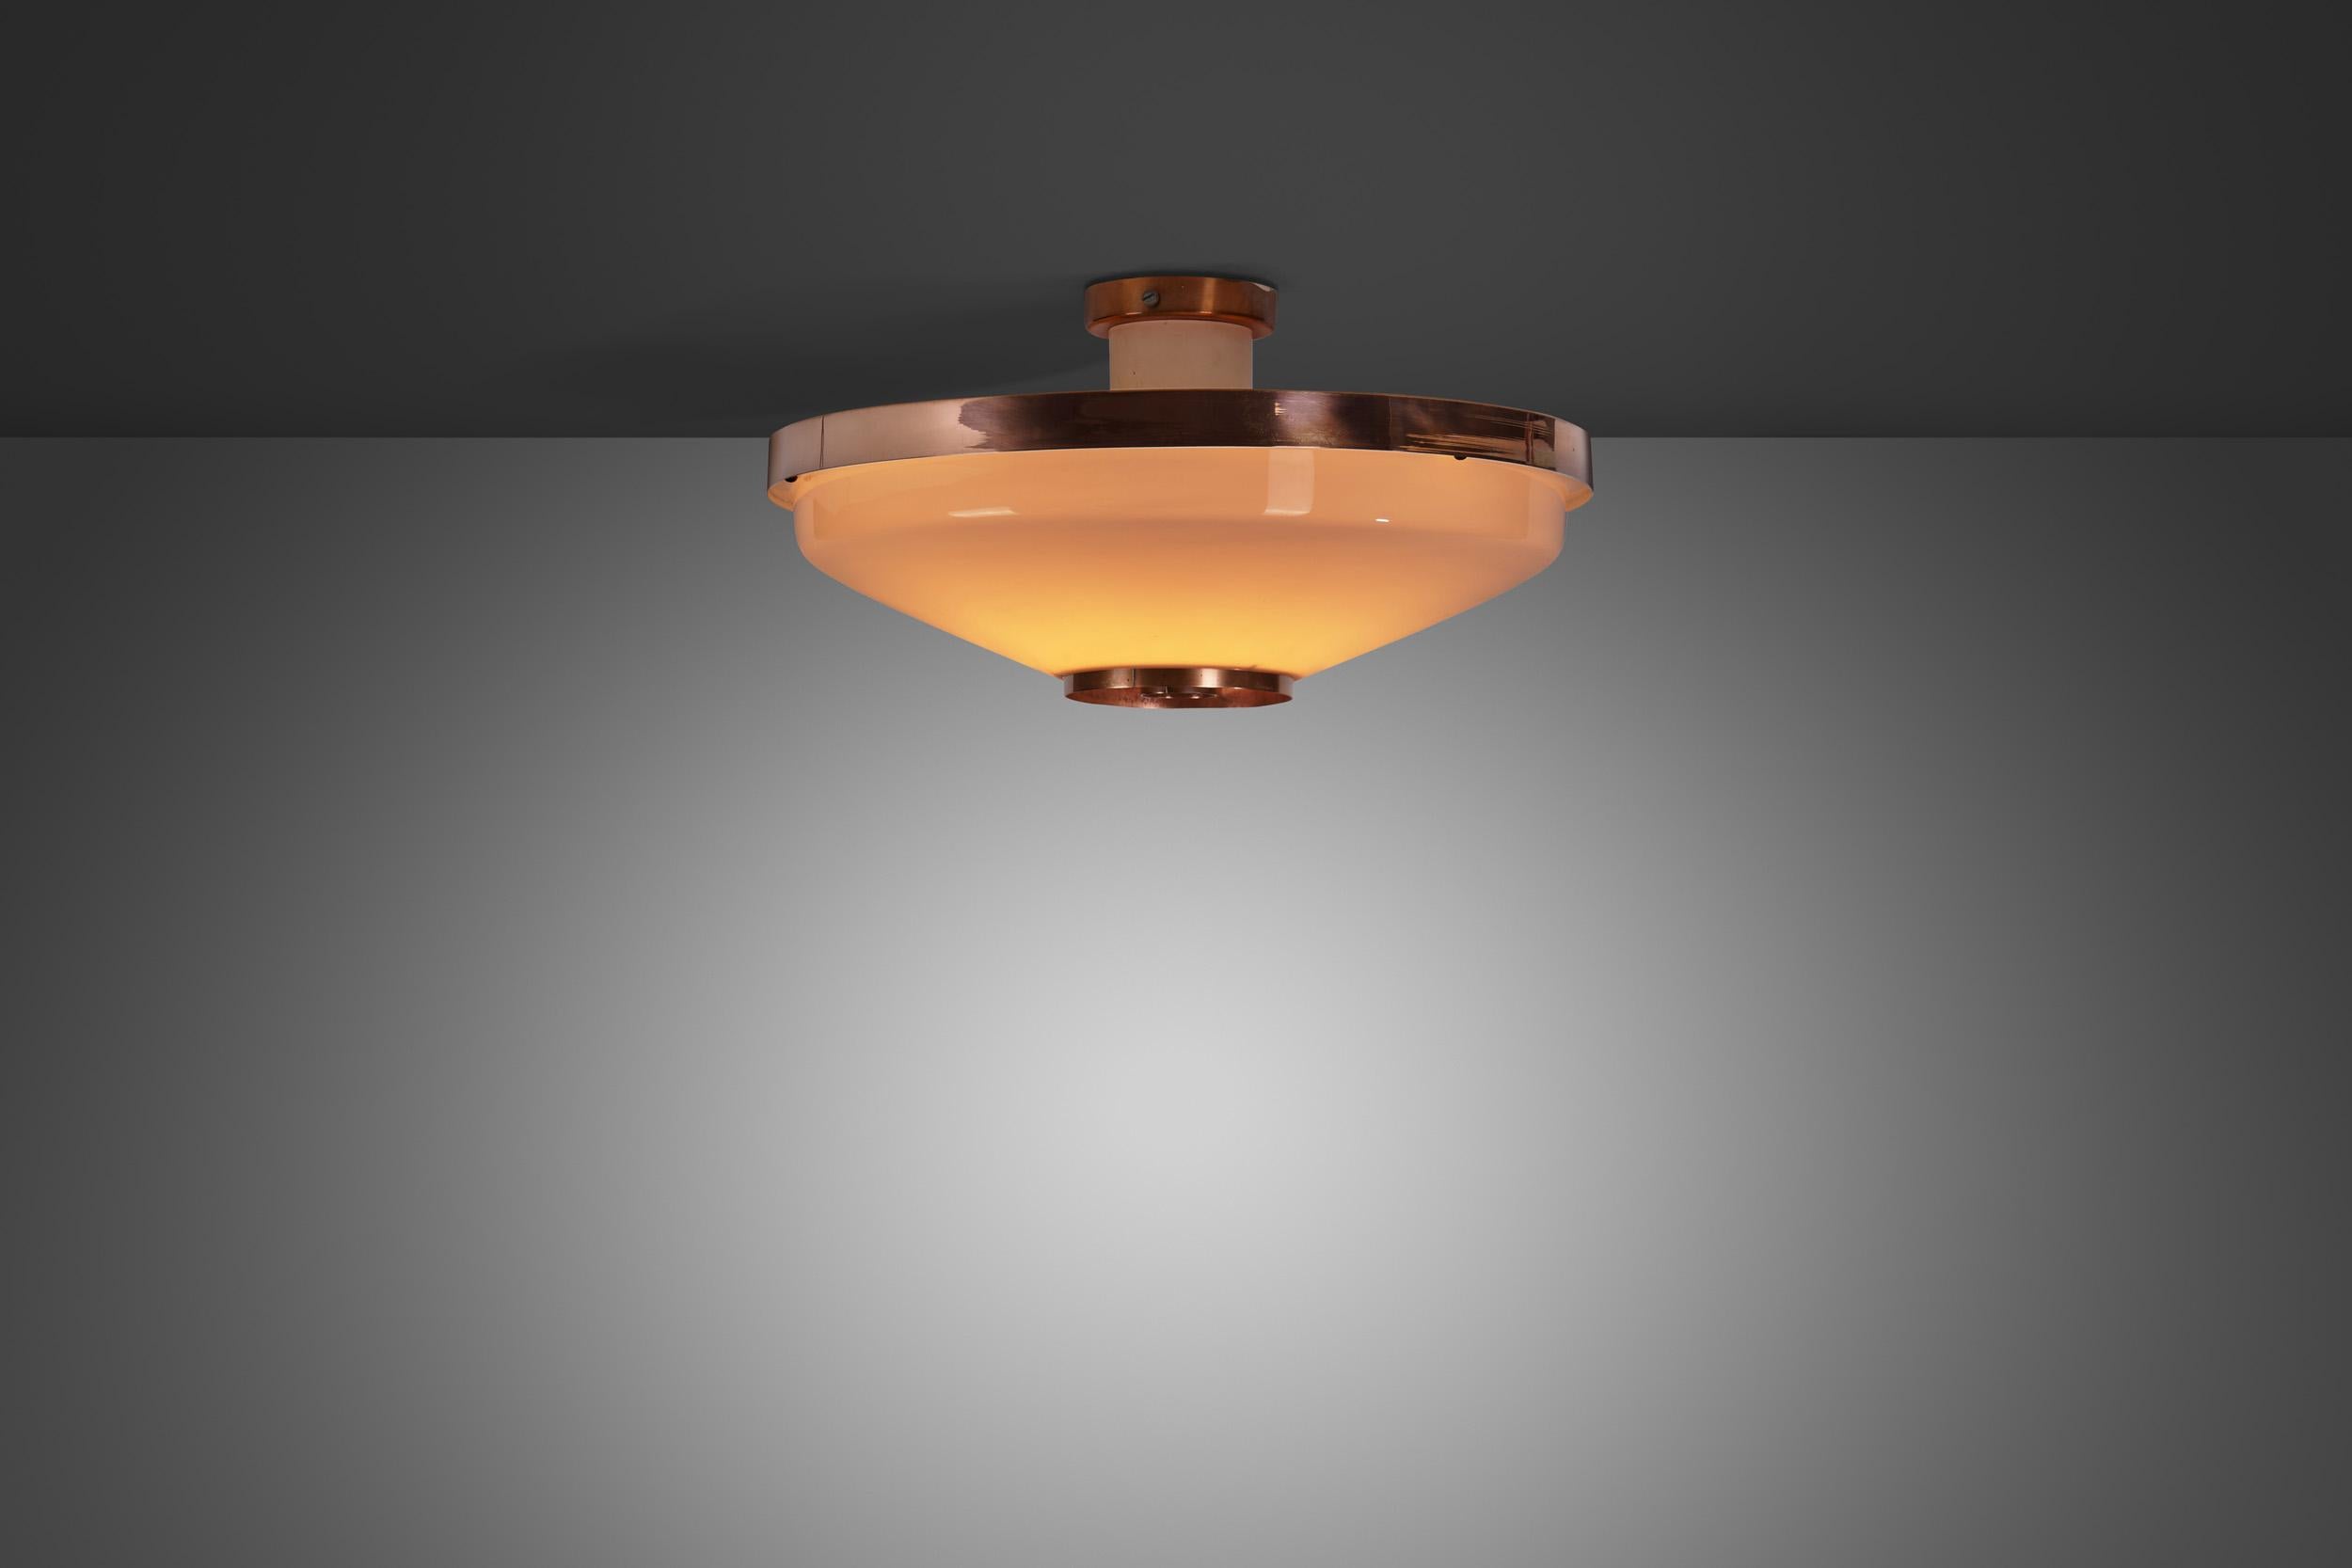 This modern ceiling light was designed during an era in which Finland saw the birth of many of its most iconic lighting models. It was a period of consistency, excellence, and sophistication design wise. As such, this “ER 180” fixture is sure to add